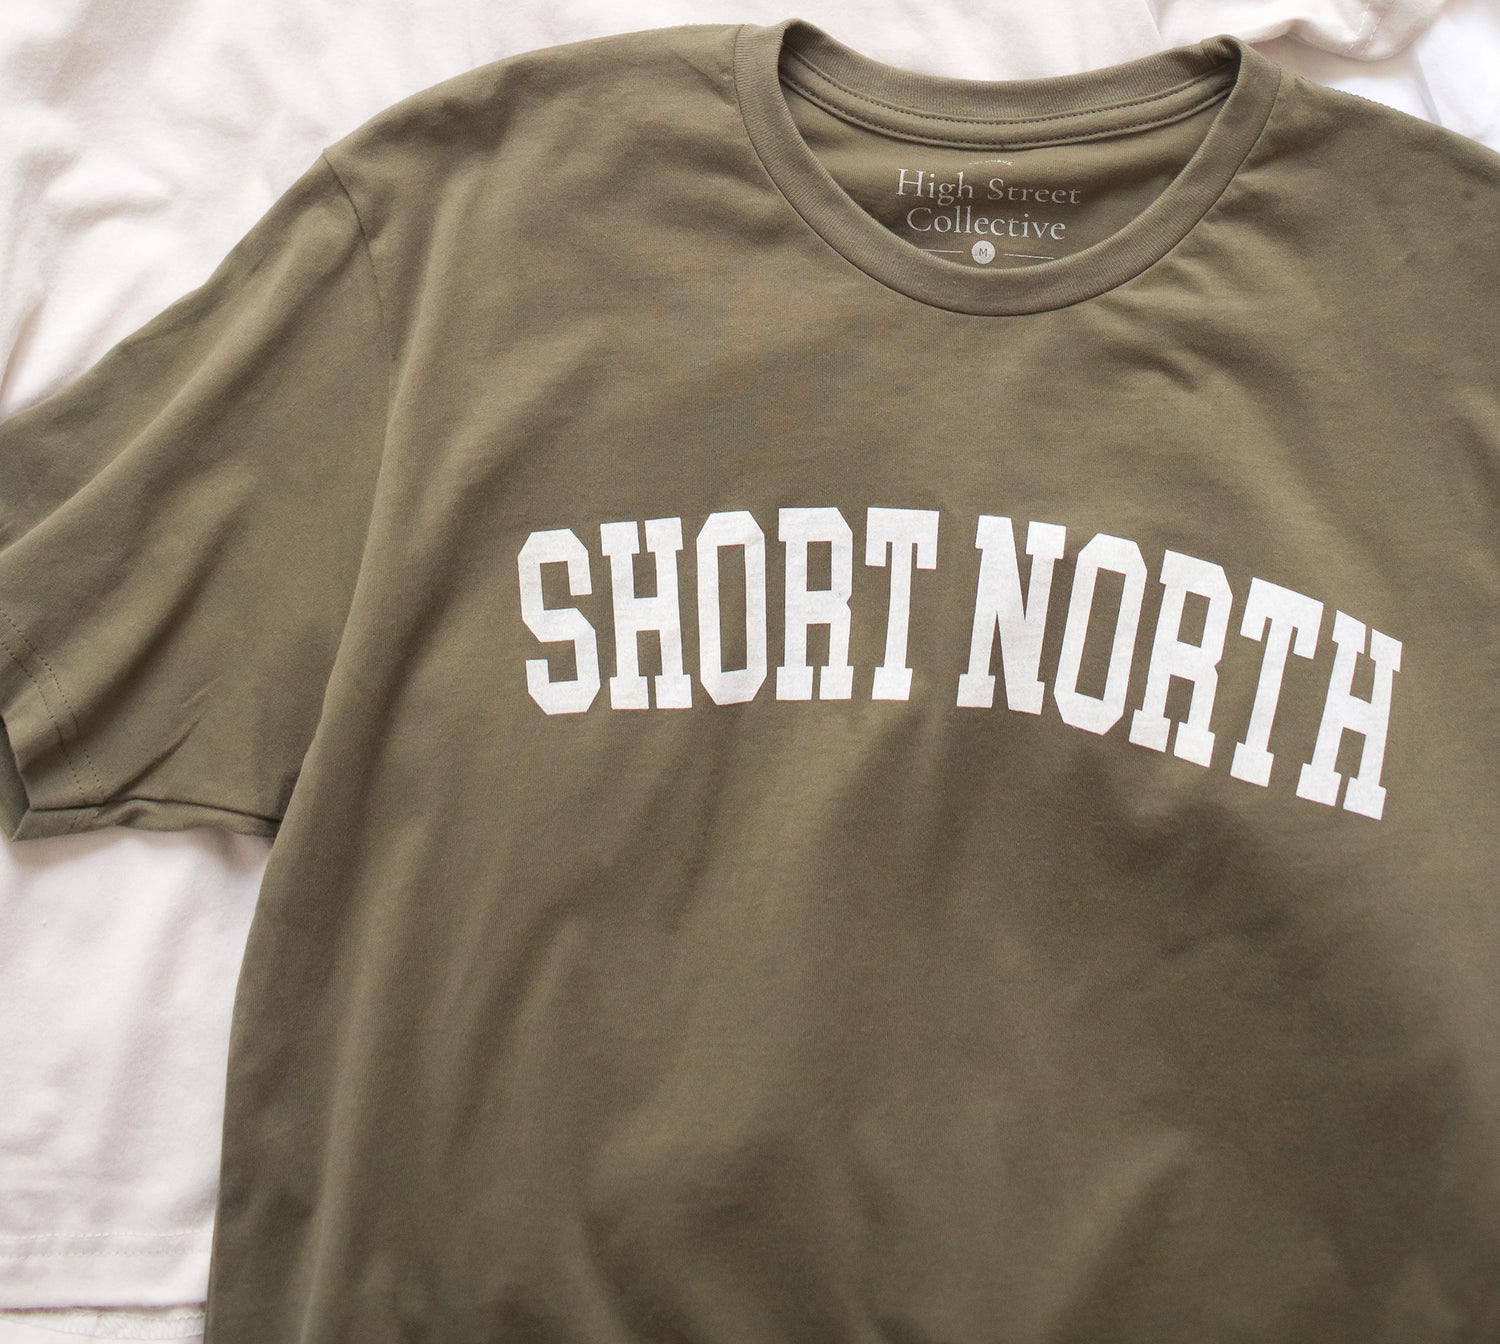 Dusty green sueded tee with white Short North graphic at front.